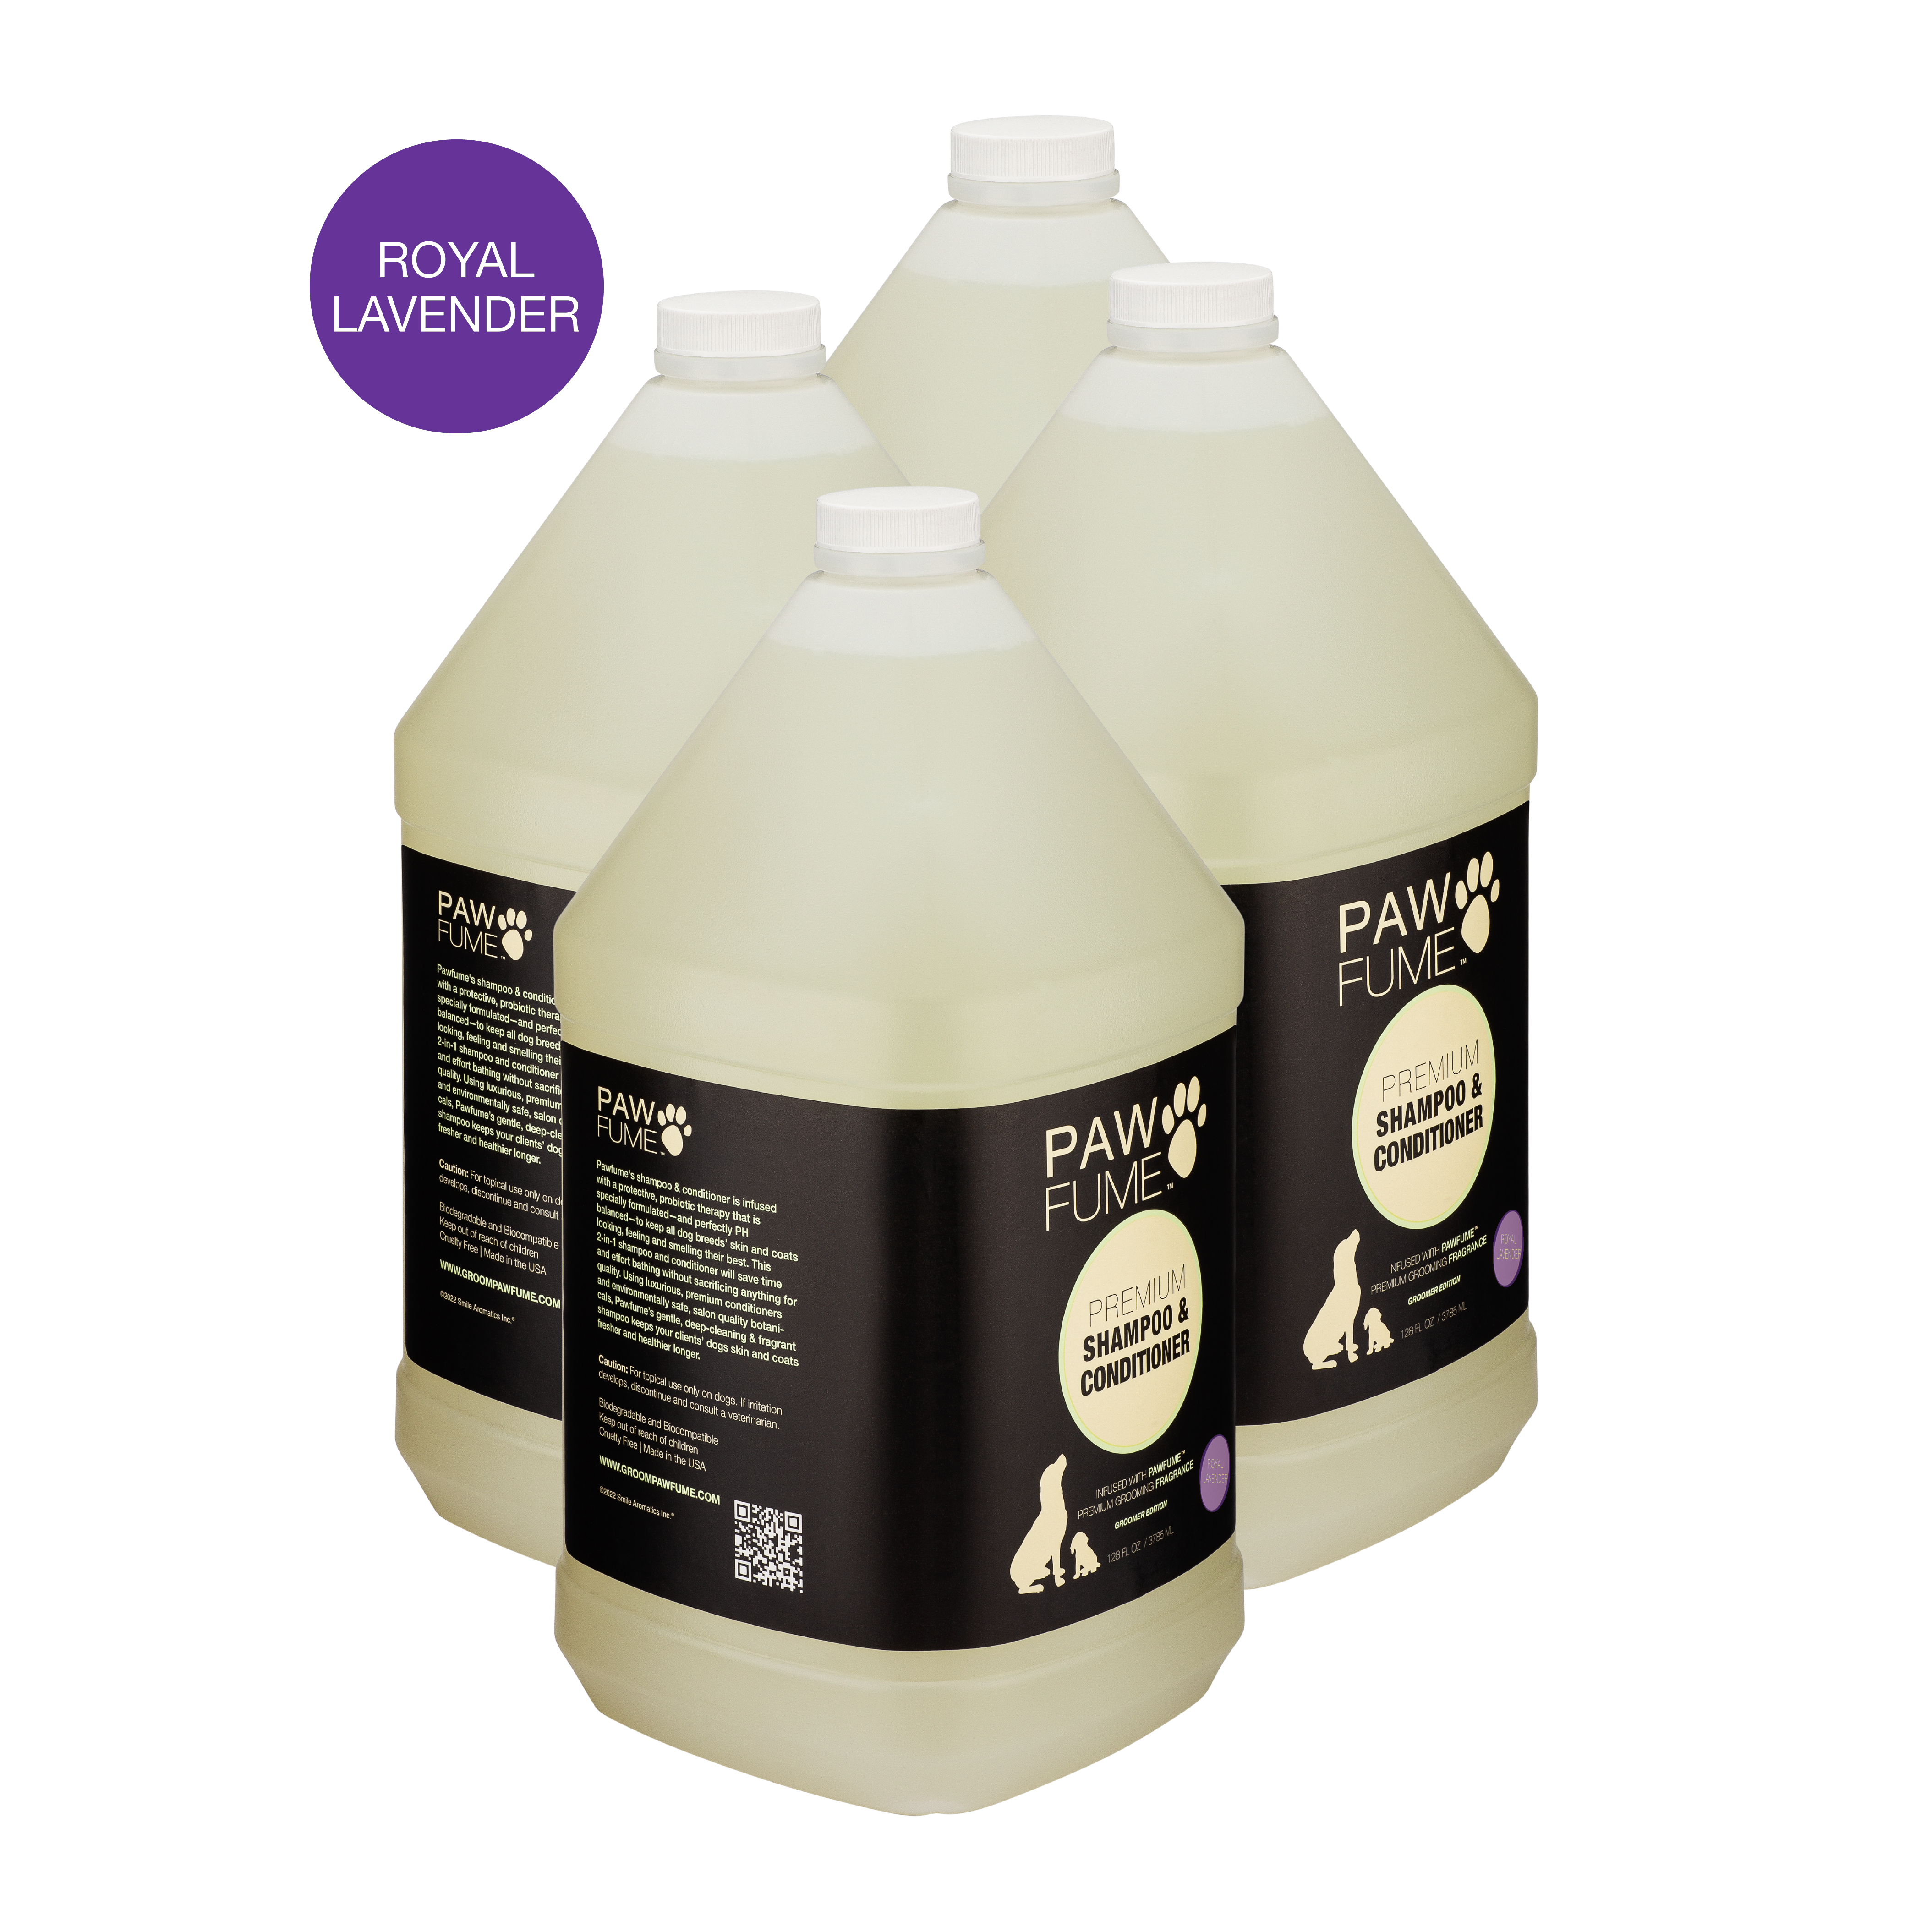 2-in-1 Shampoo & Conditioner: 4-Pack of 1-Gallon